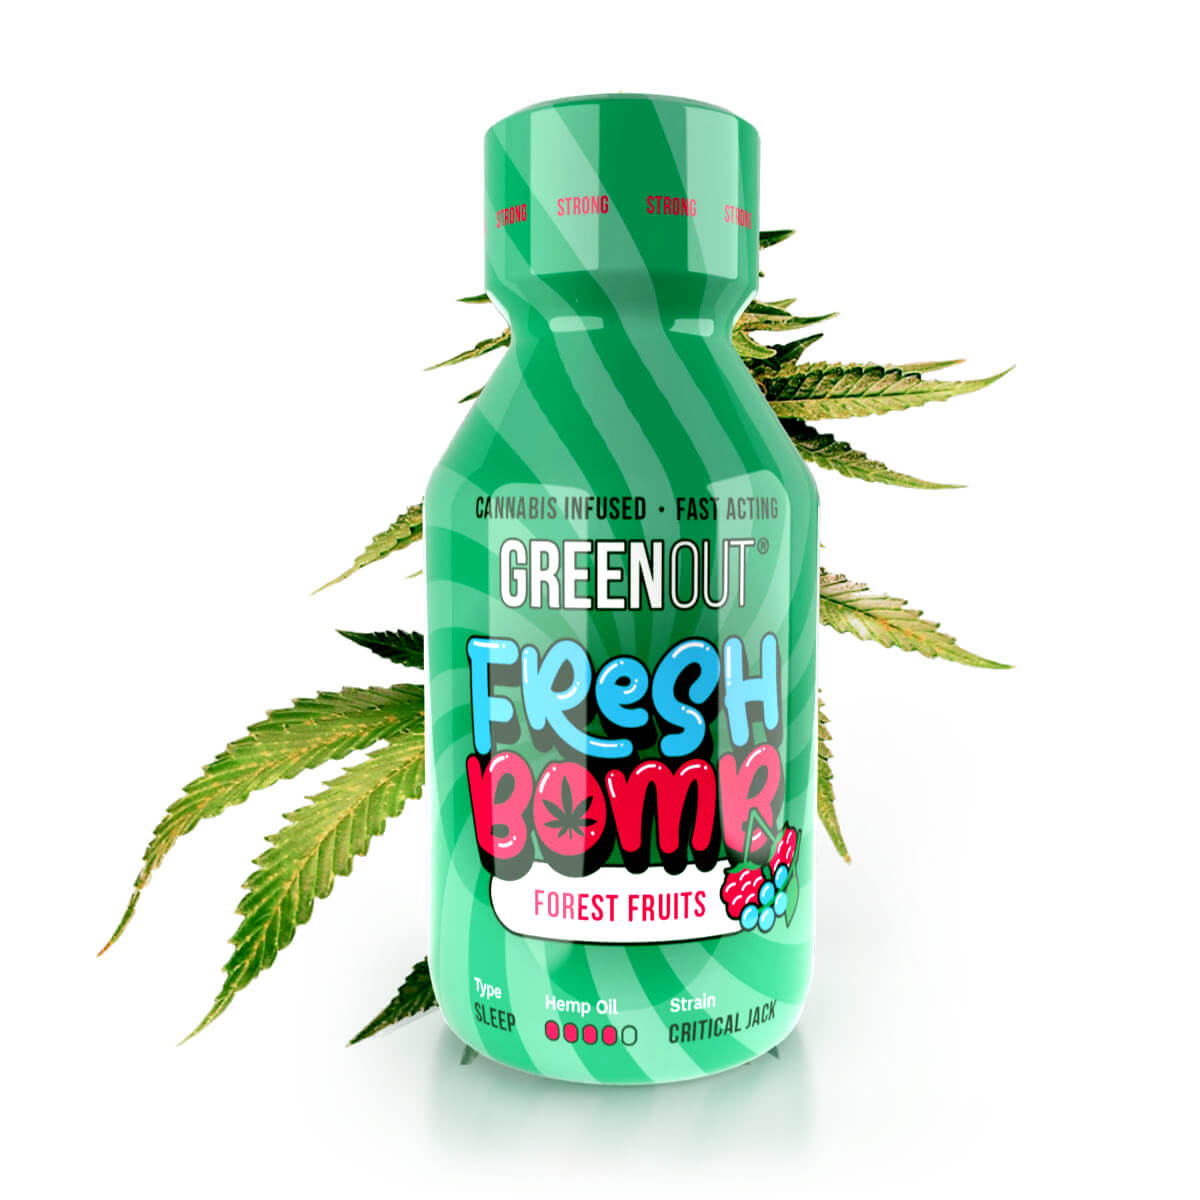 Greenout-fresh-bomb-forest-fruits-strong-polandweed.pl_